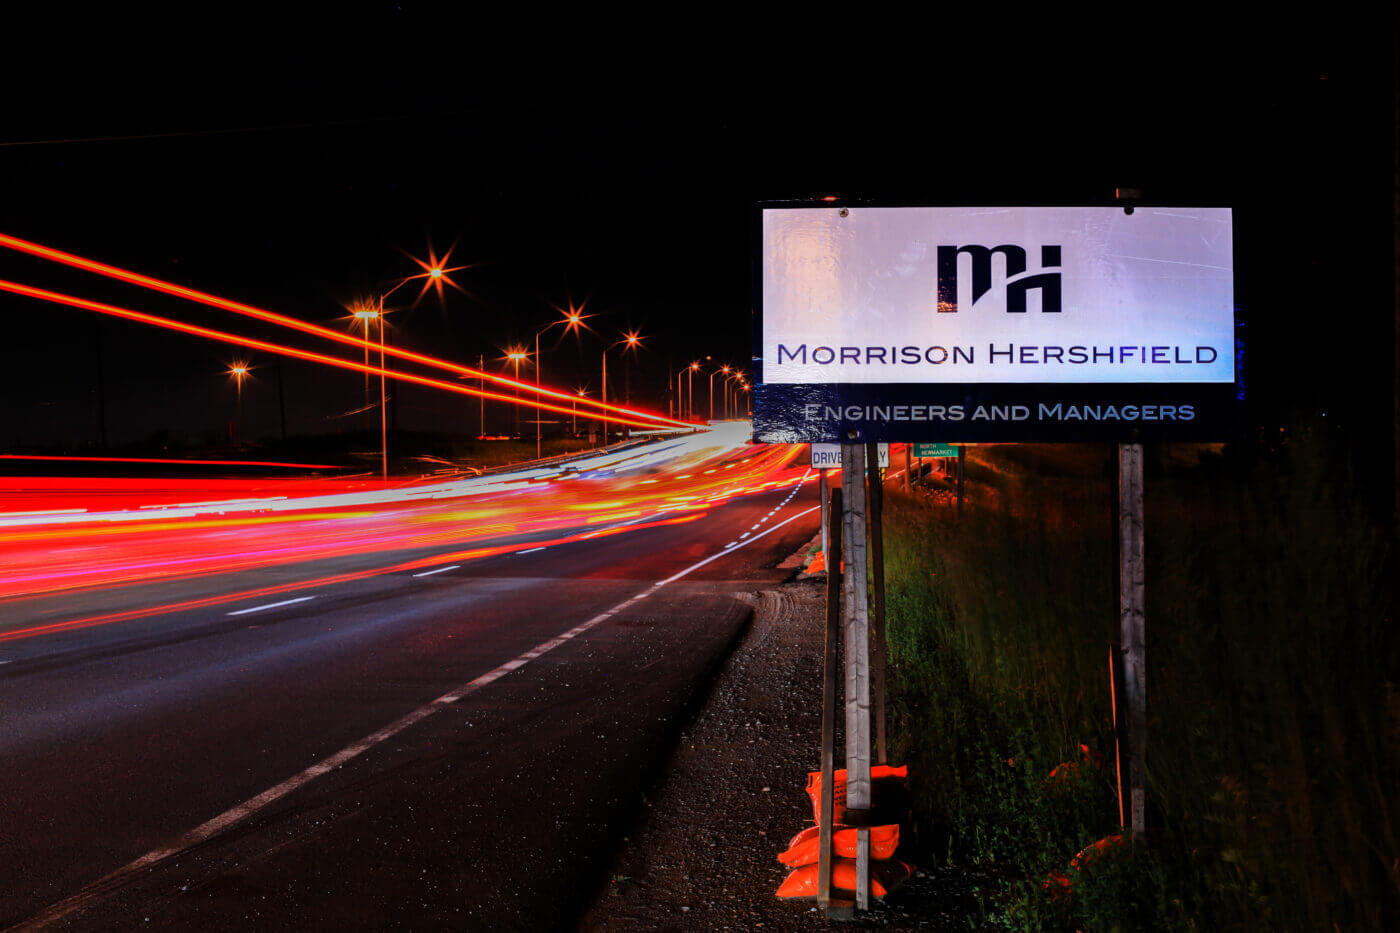 MH Signage at Night Before Interchange